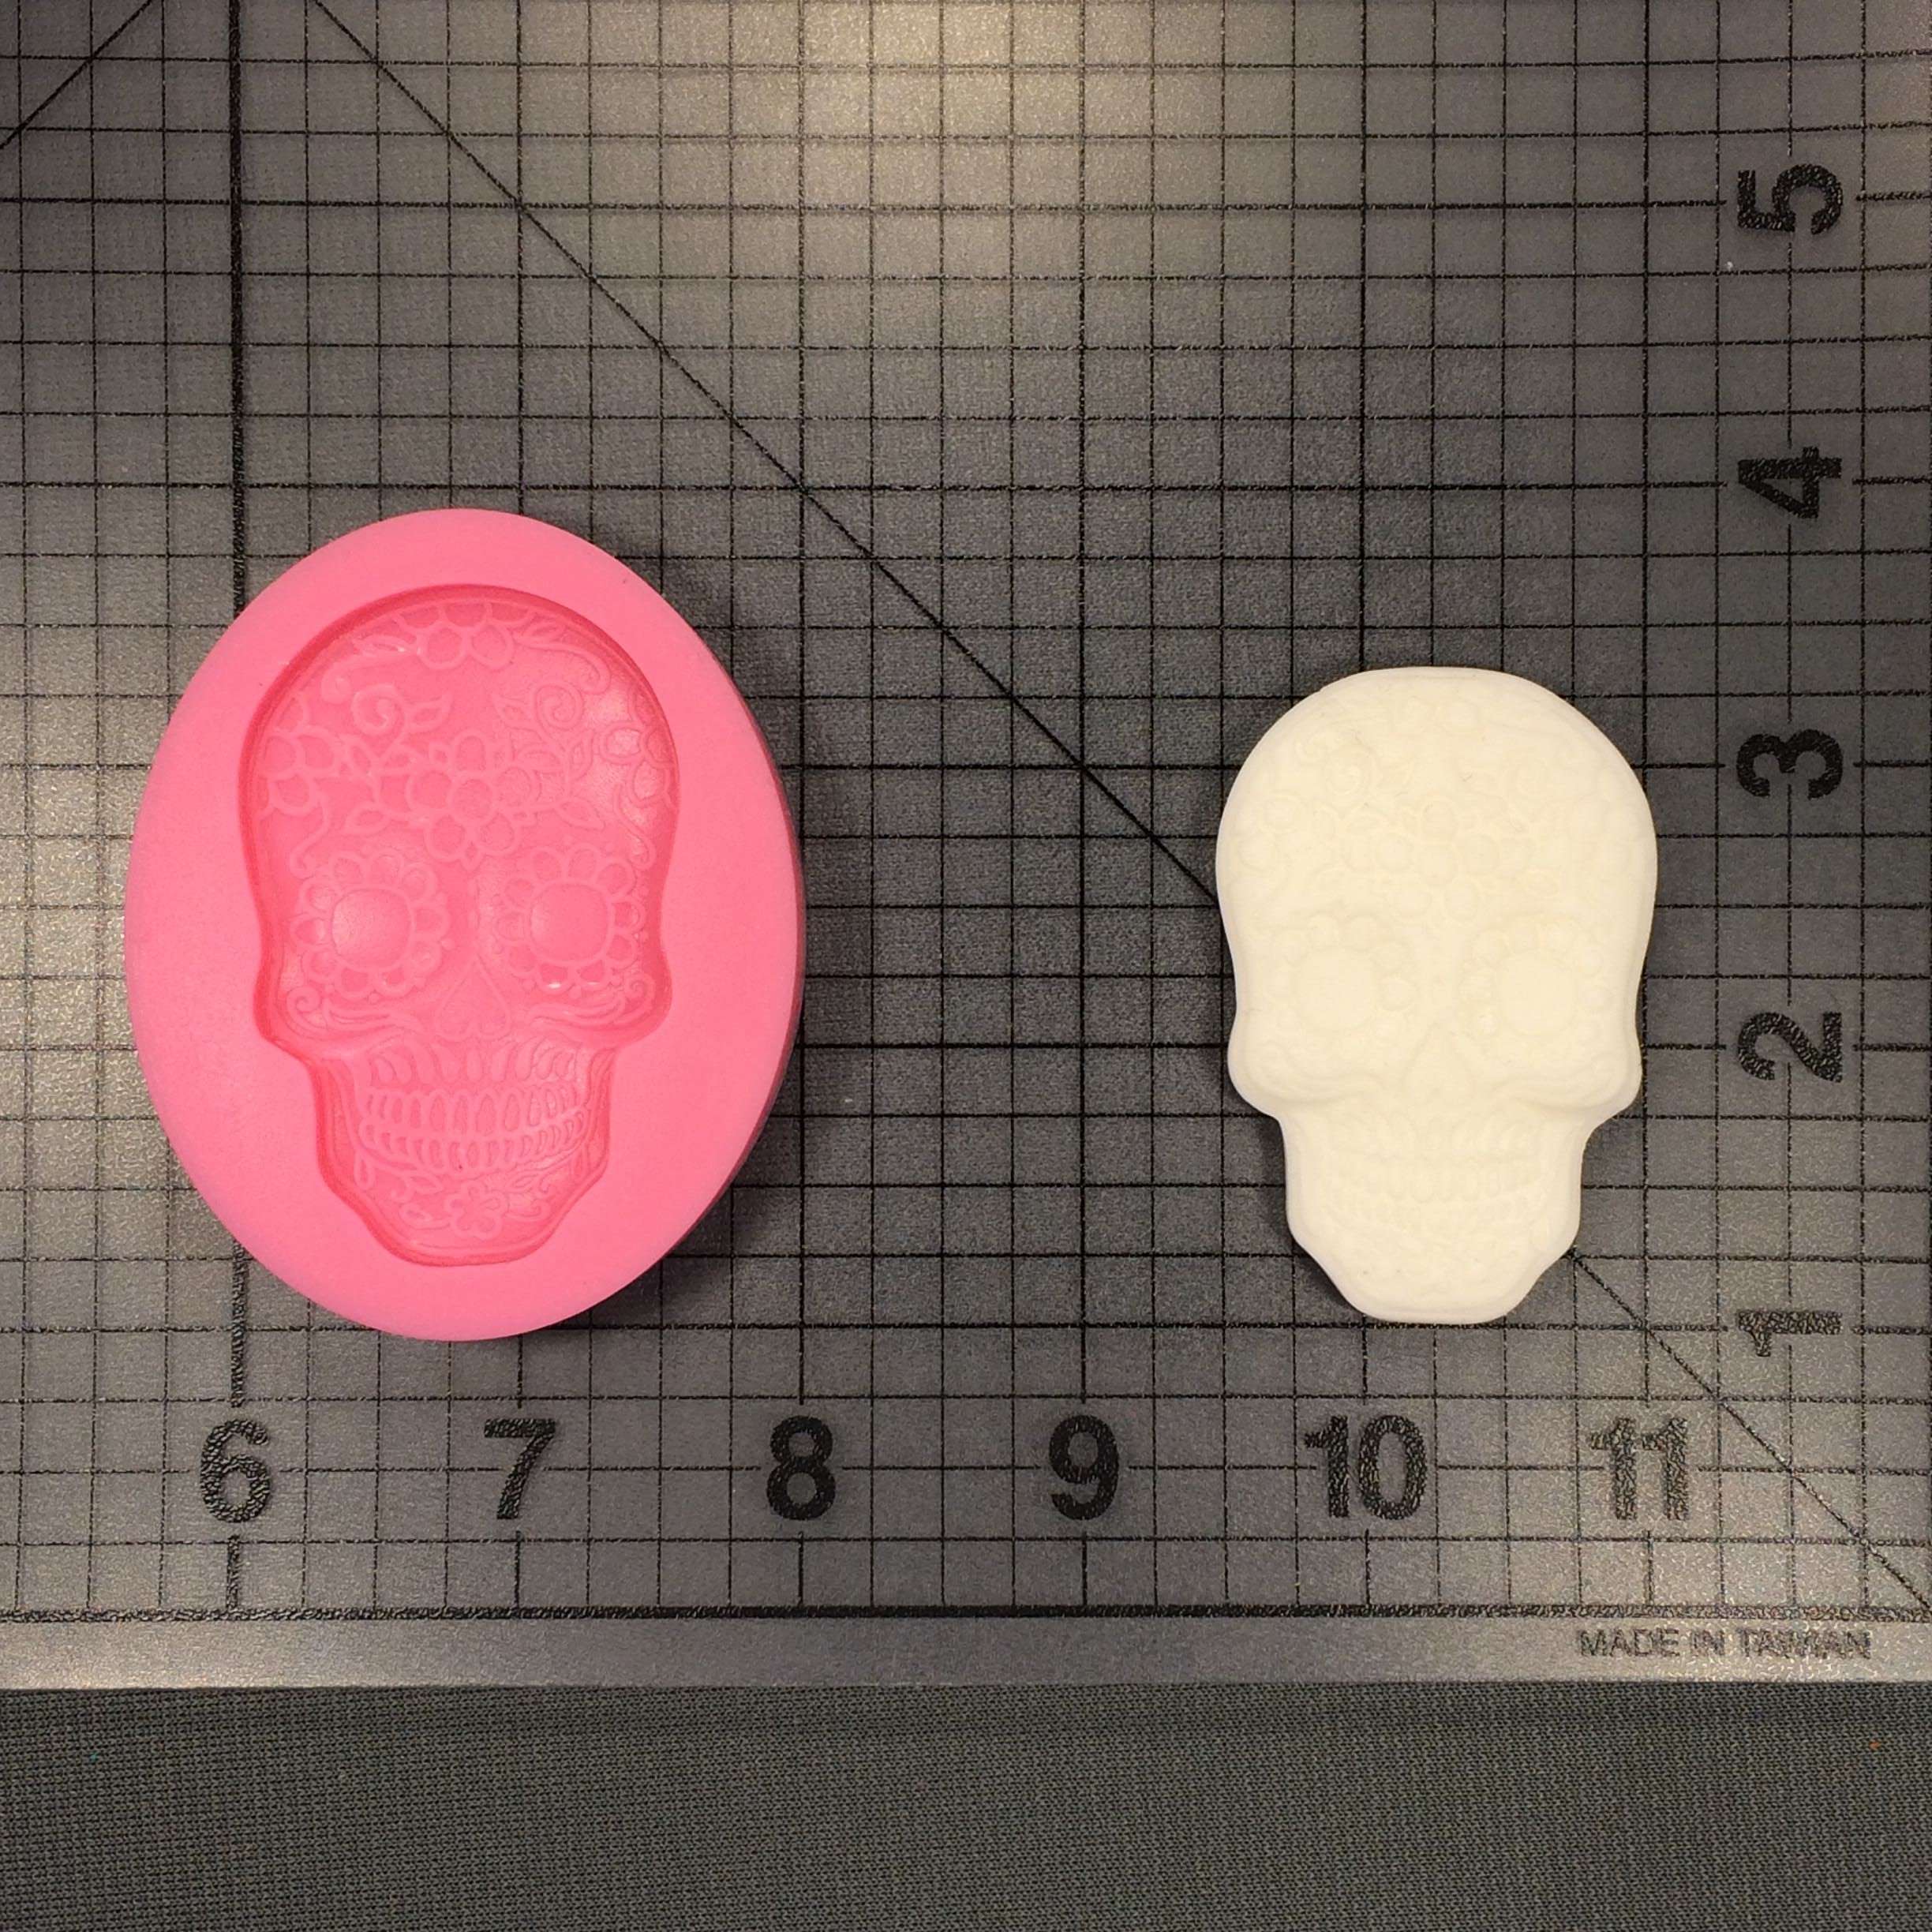 6.9x5.2x2.4 3D Partial Skull Silicone Mold – Crafted Elements